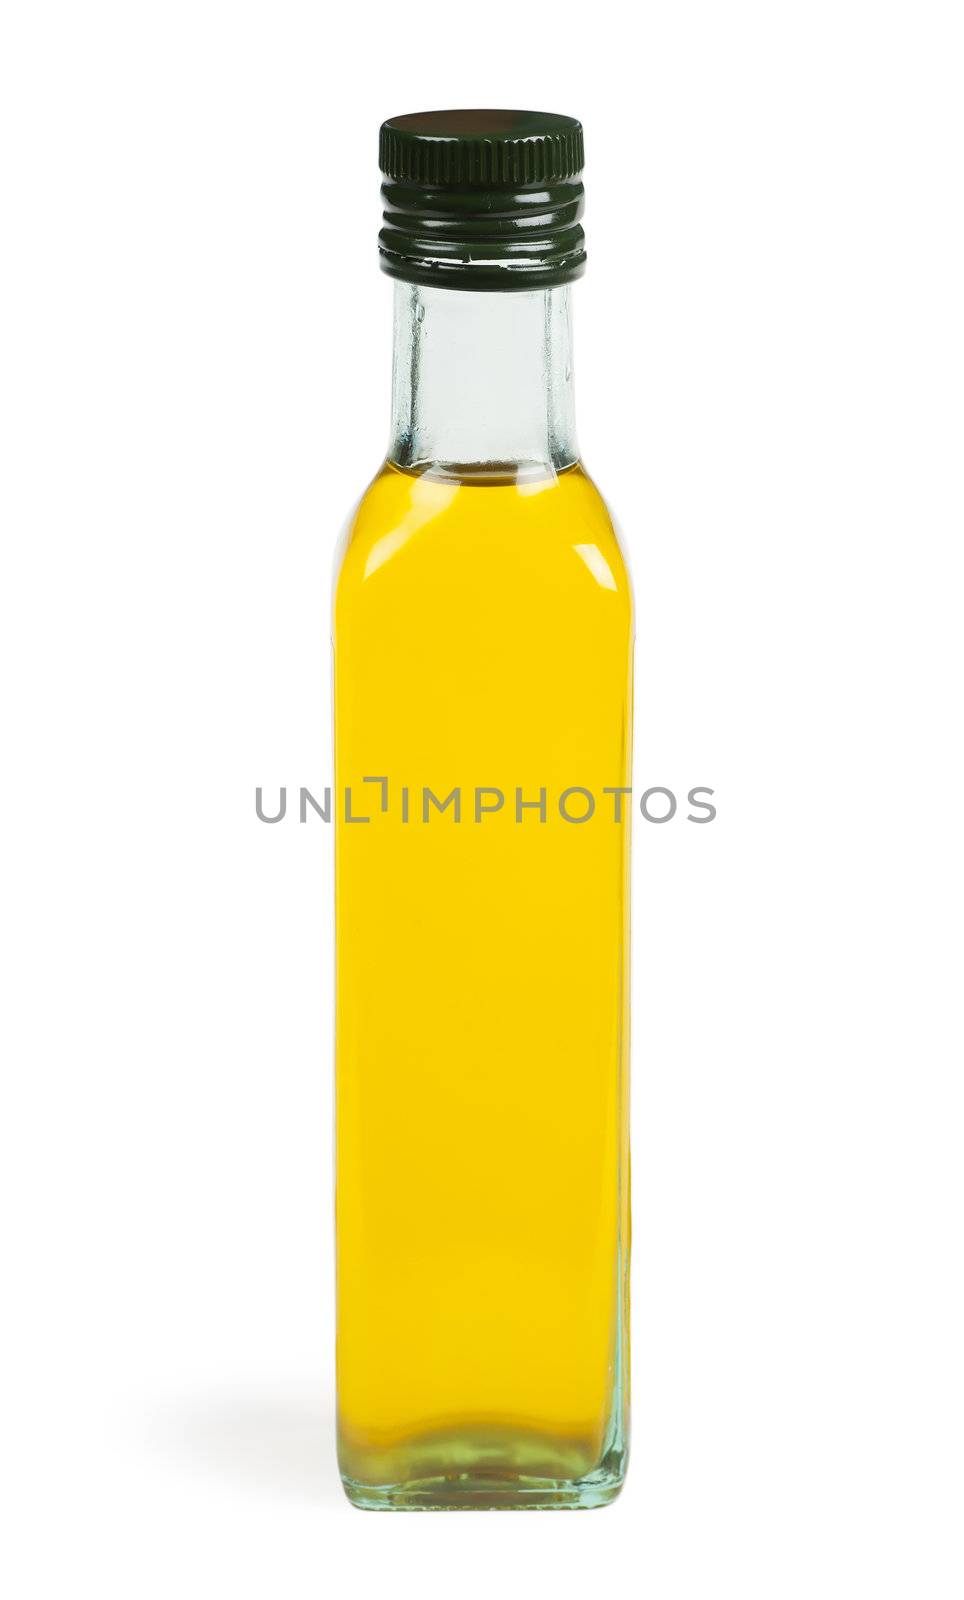 A bottle with olive oil isolated on the white